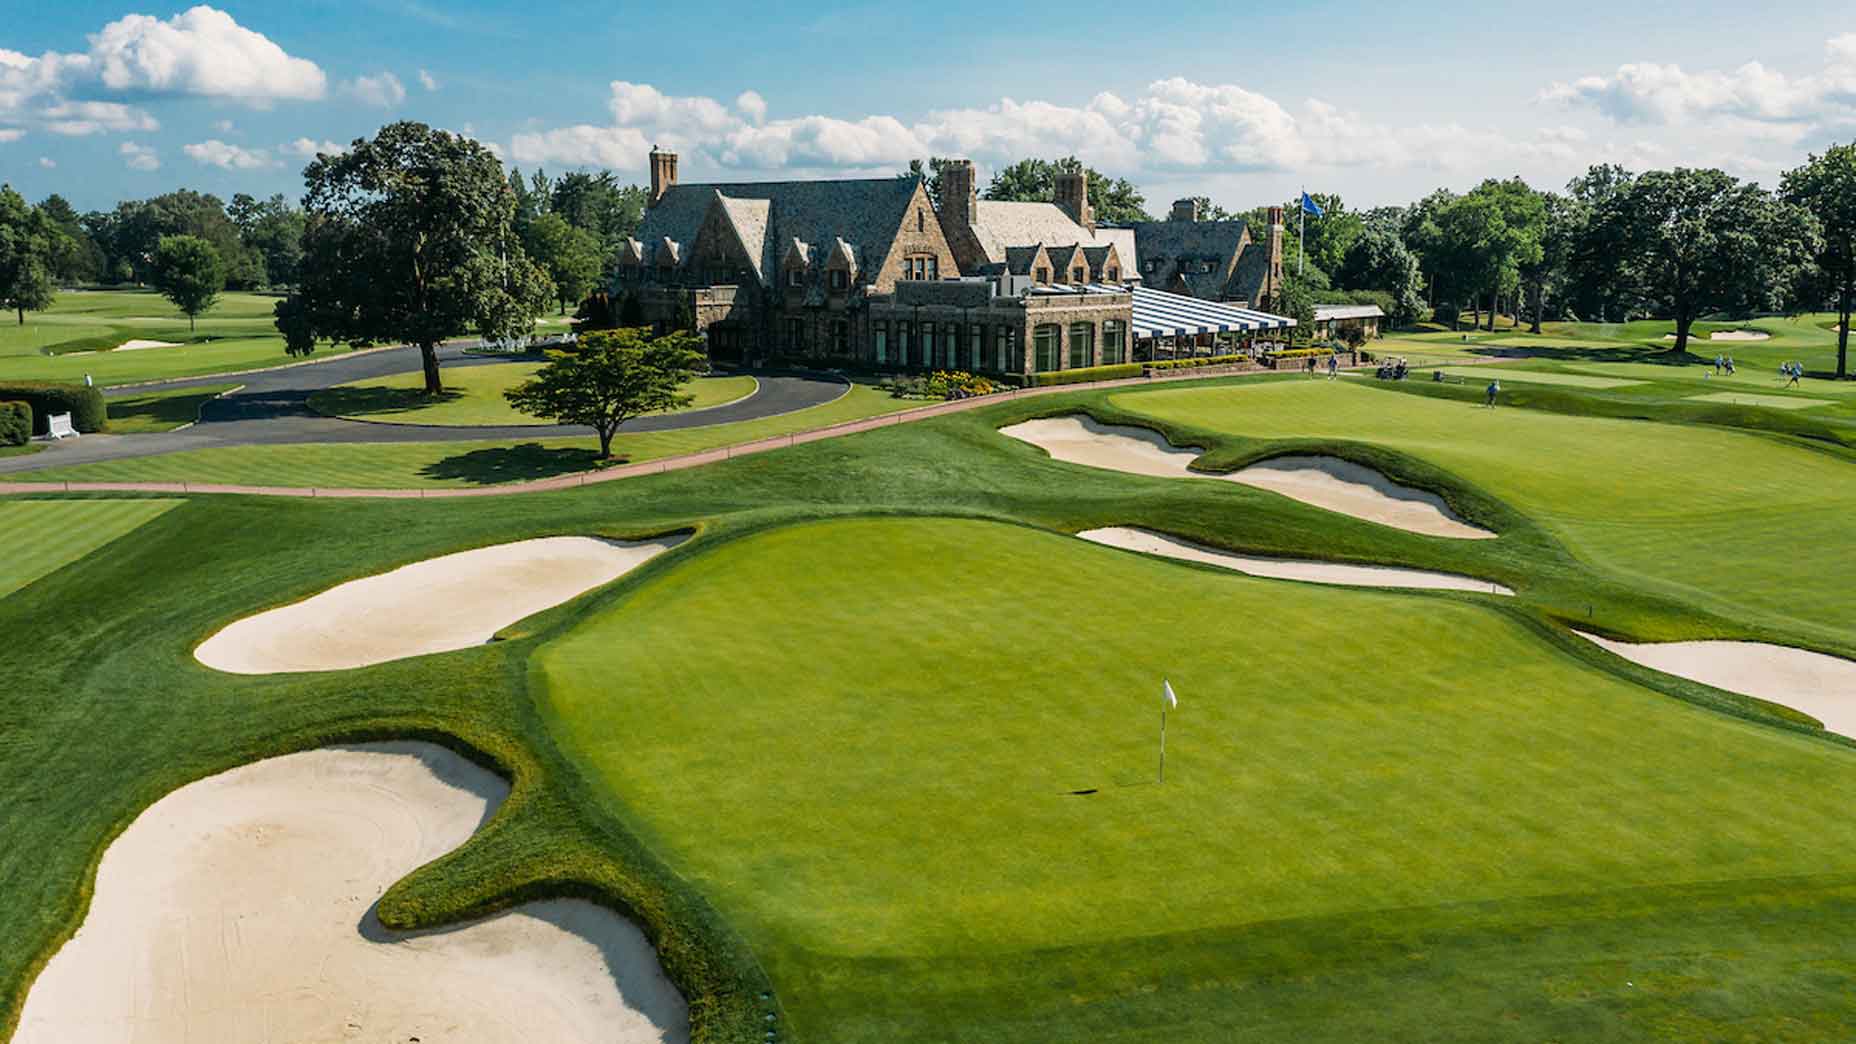 USGA tabs Winged Foot for 2028 US Open, venues set through 2030